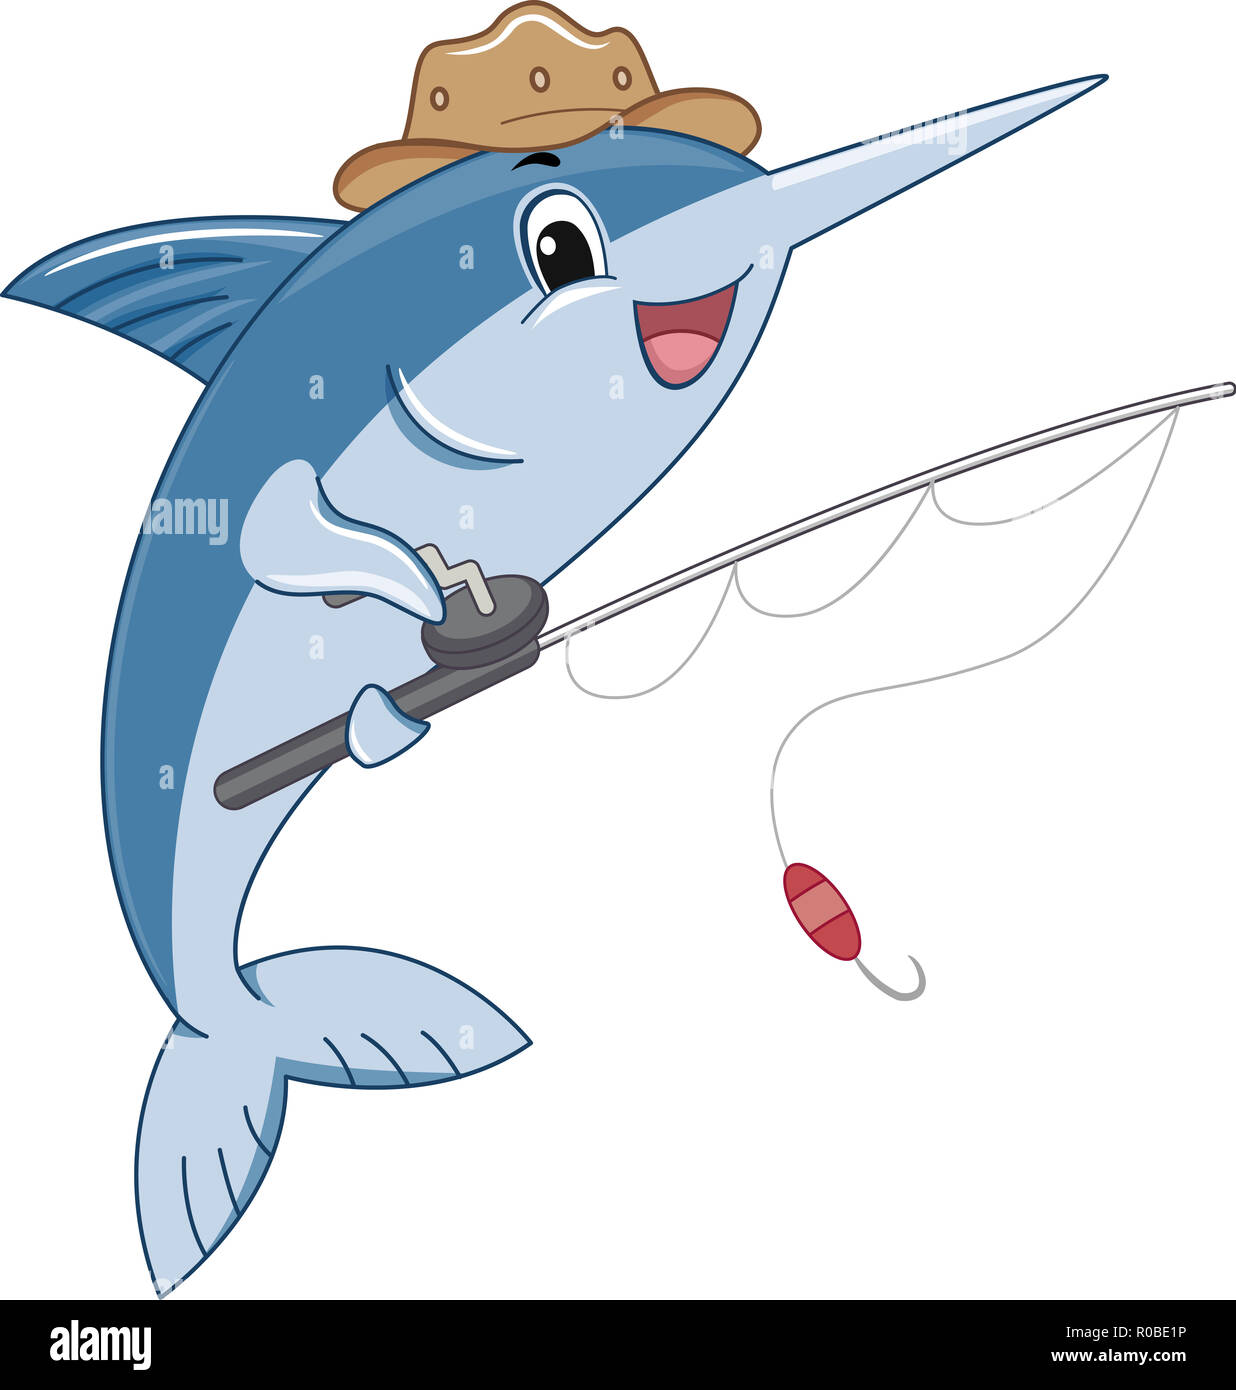 https://c8.alamy.com/comp/R0BE1P/illustration-of-a-blue-marlin-mascot-wearing-a-hat-and-holding-a-fishing-rod-R0BE1P.jpg